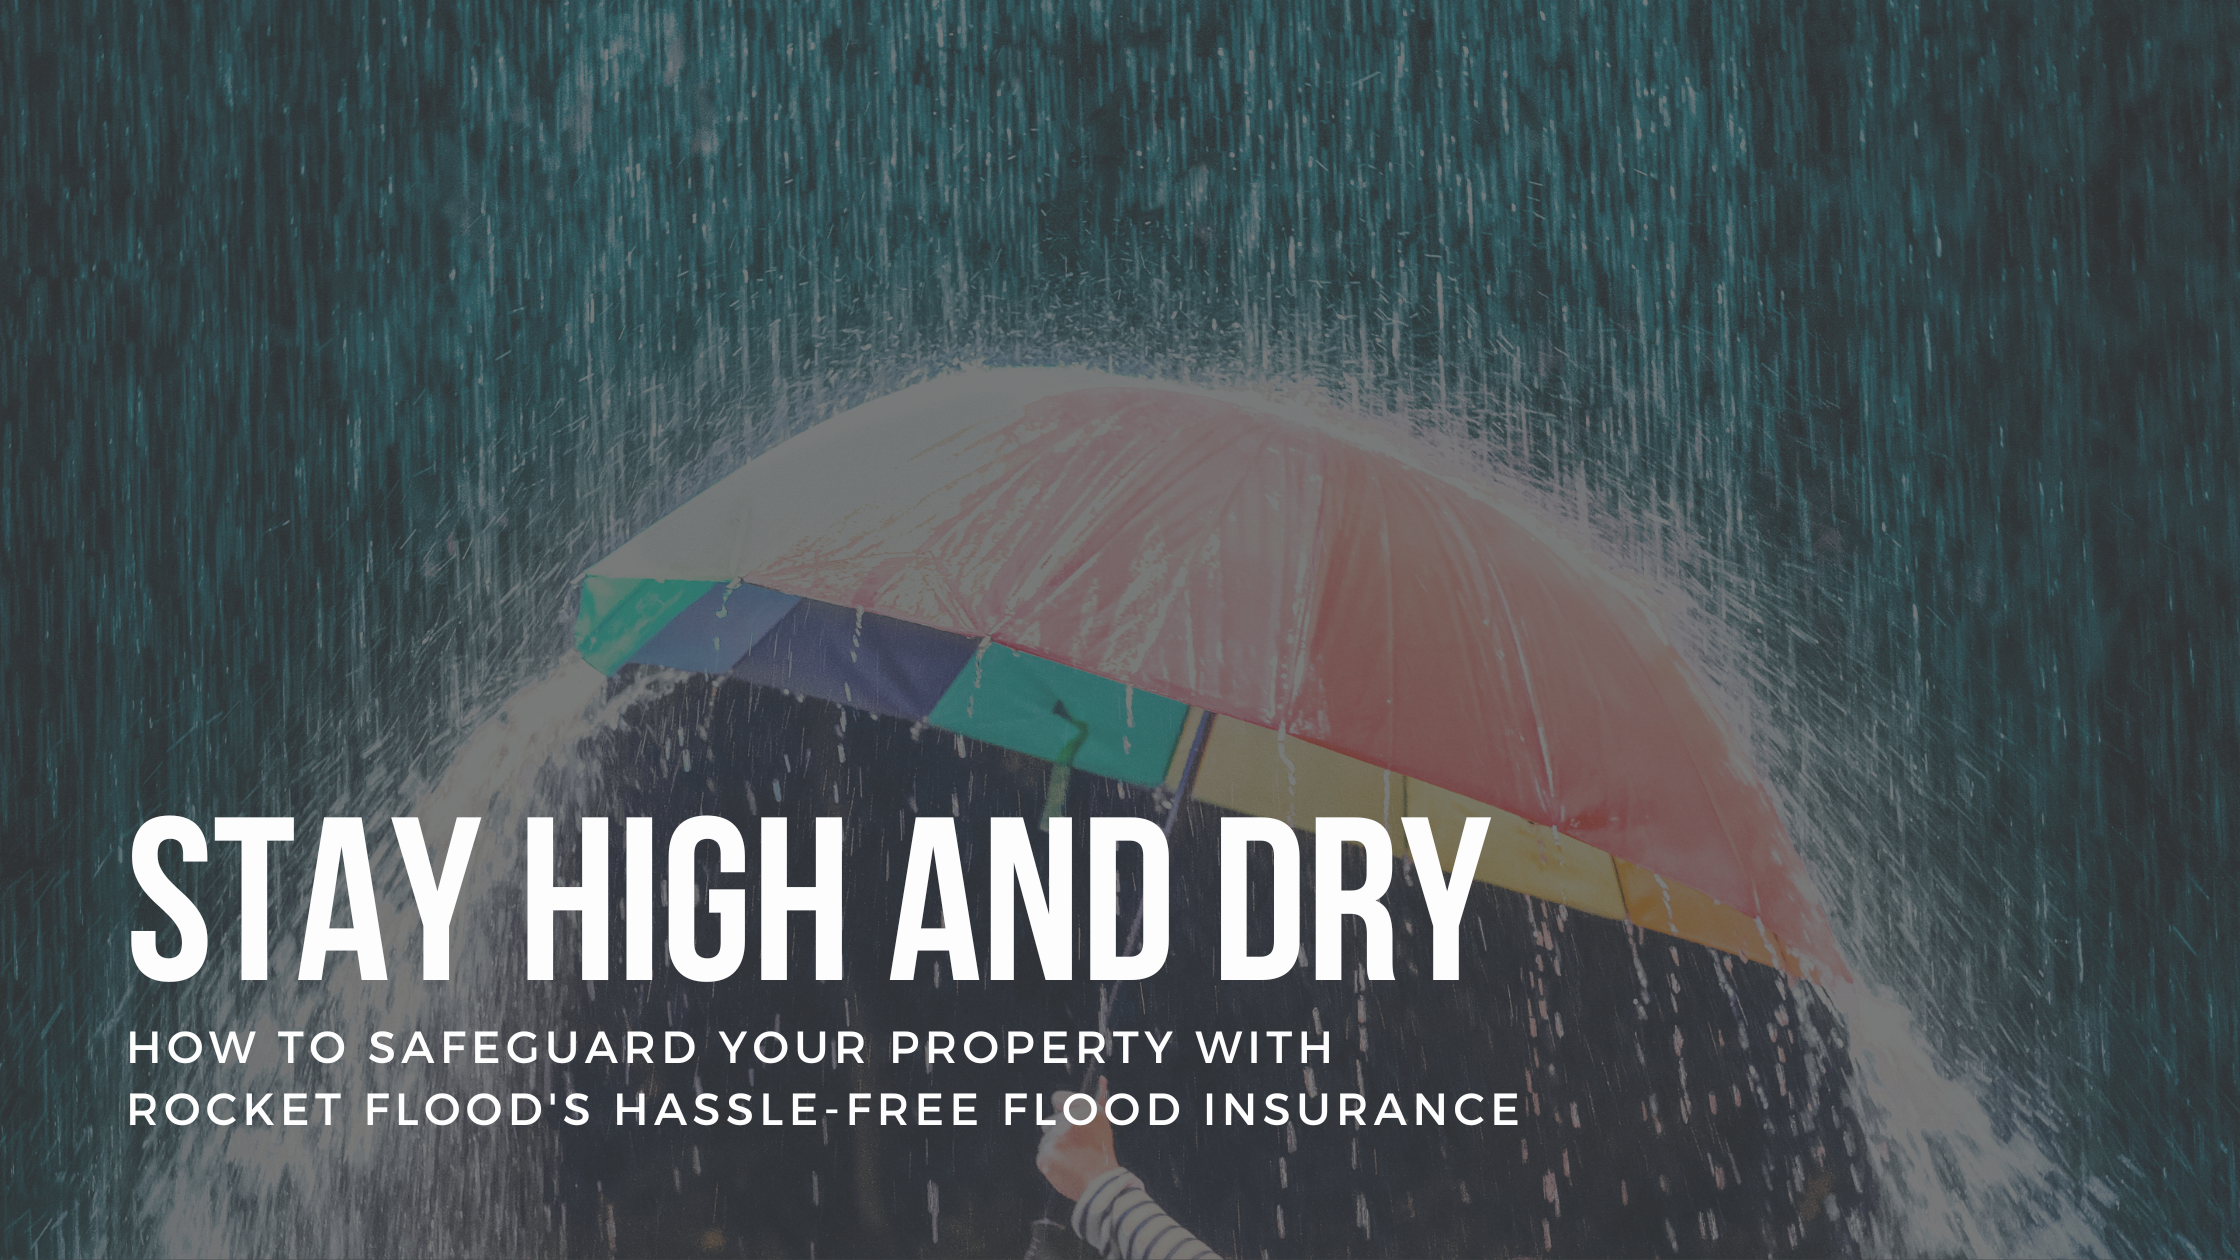 Stay high and dry: How to safeguard your property with Rocket Flood's hassle-free flood insurance